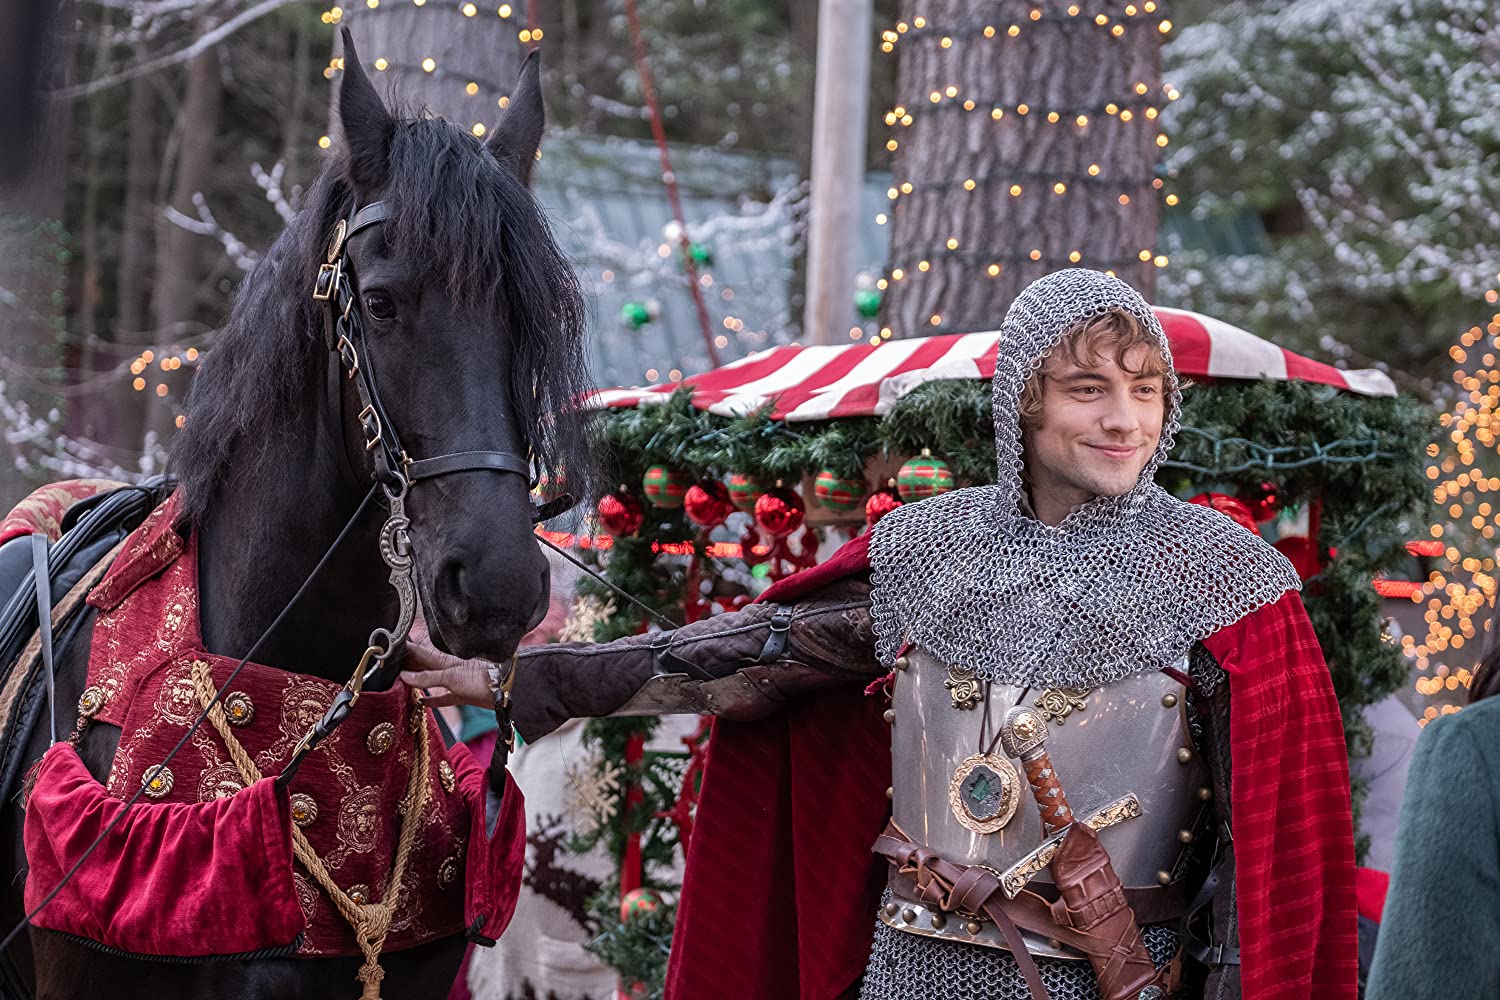 Josh Whitehouse in The Knight Before Christmas (2019)